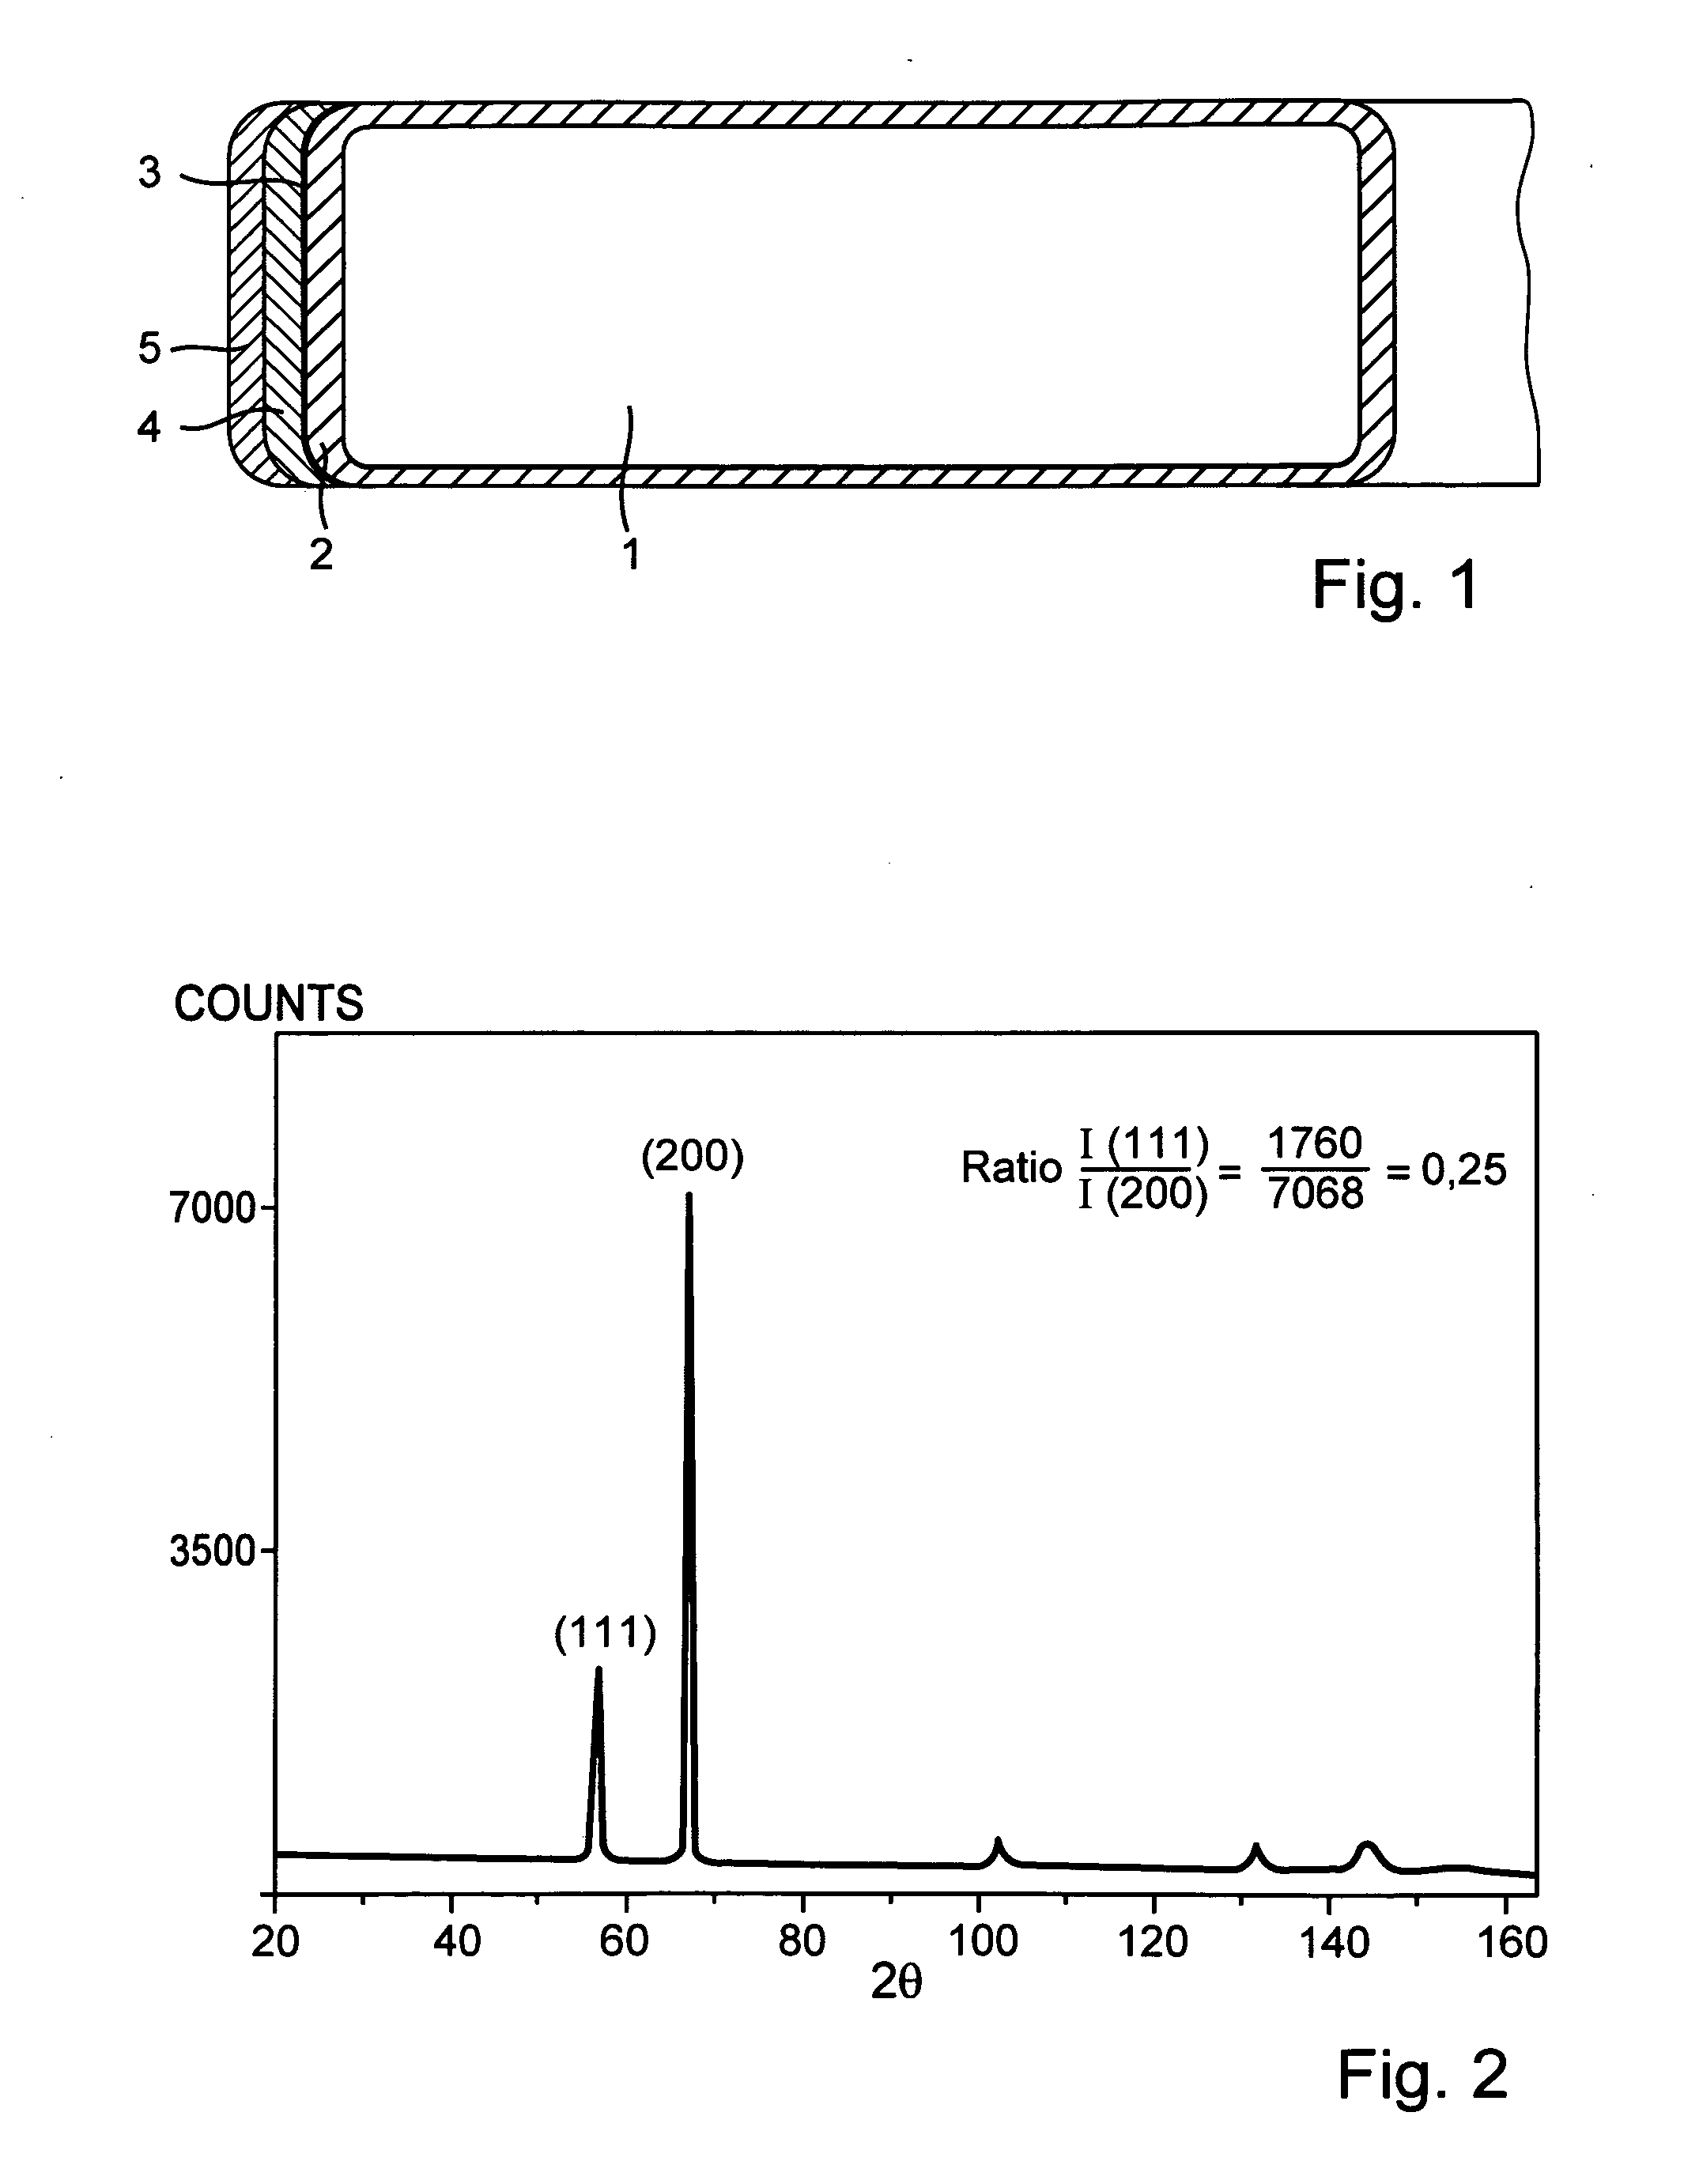 Piston ring for internal combustion engines